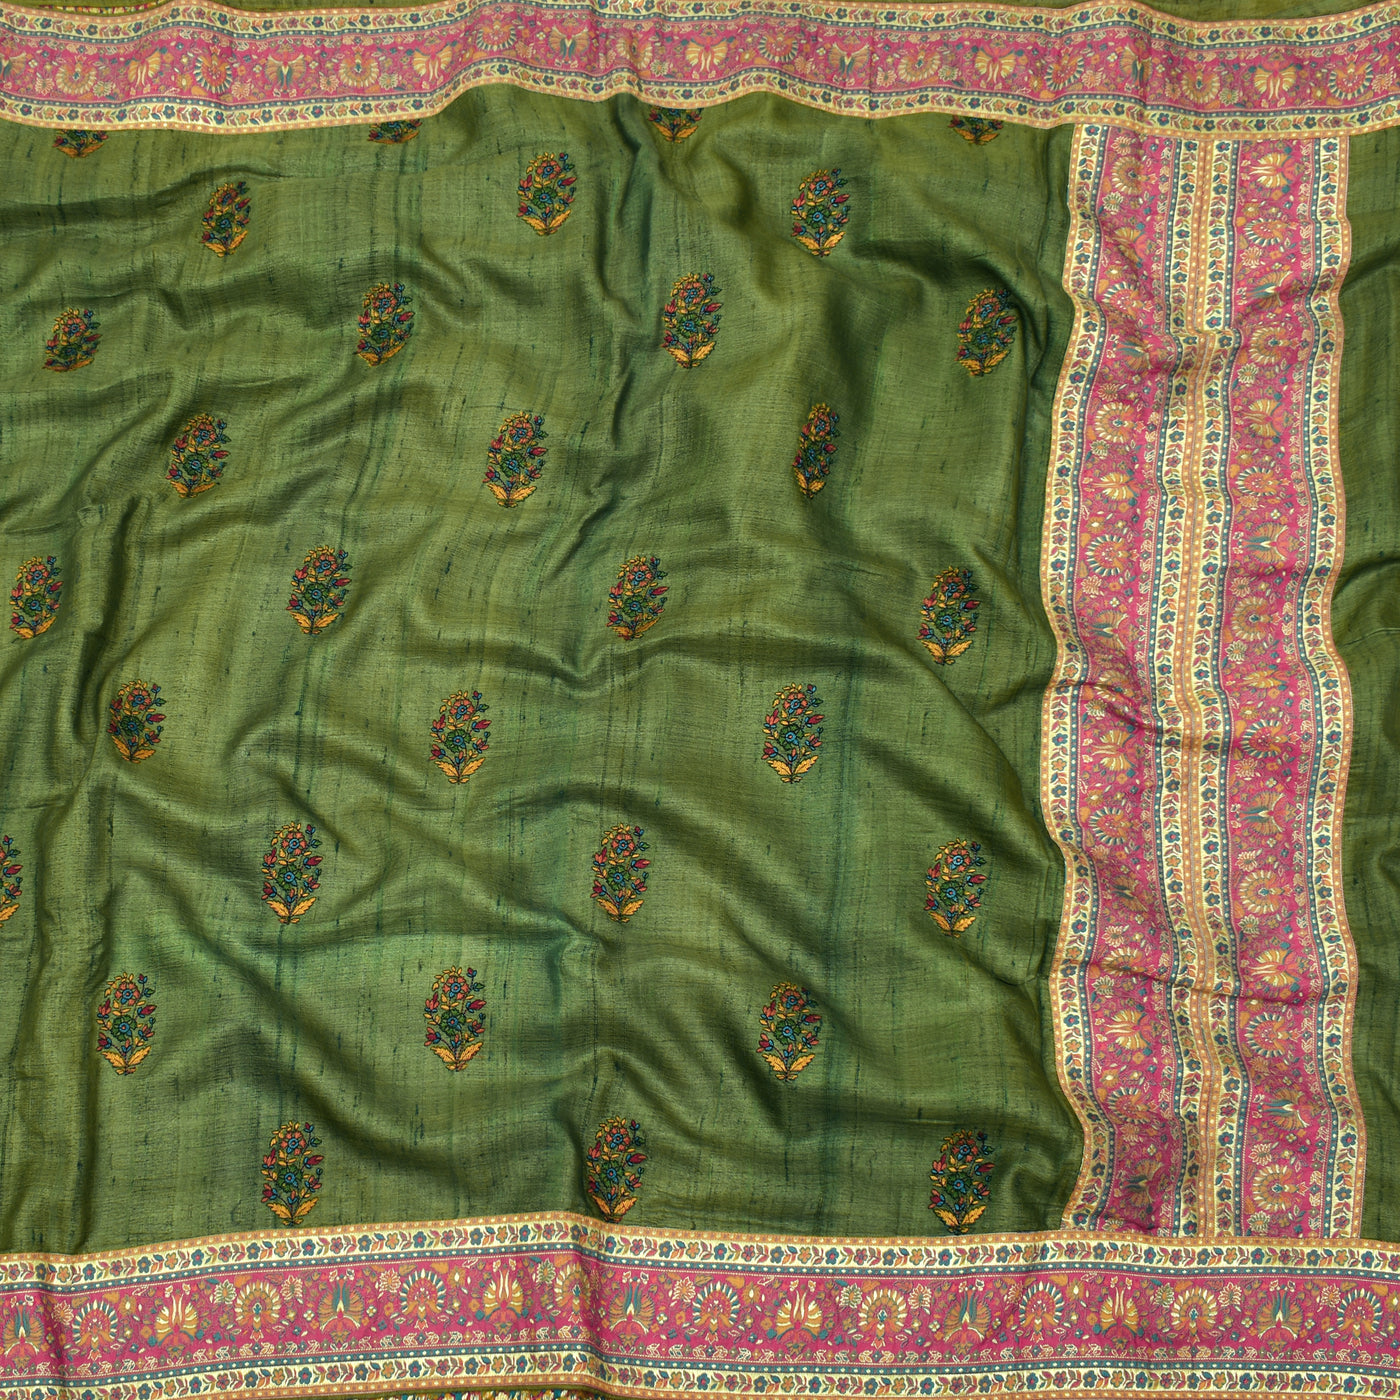 Olive Green Saree with Banaras Embroidery Border